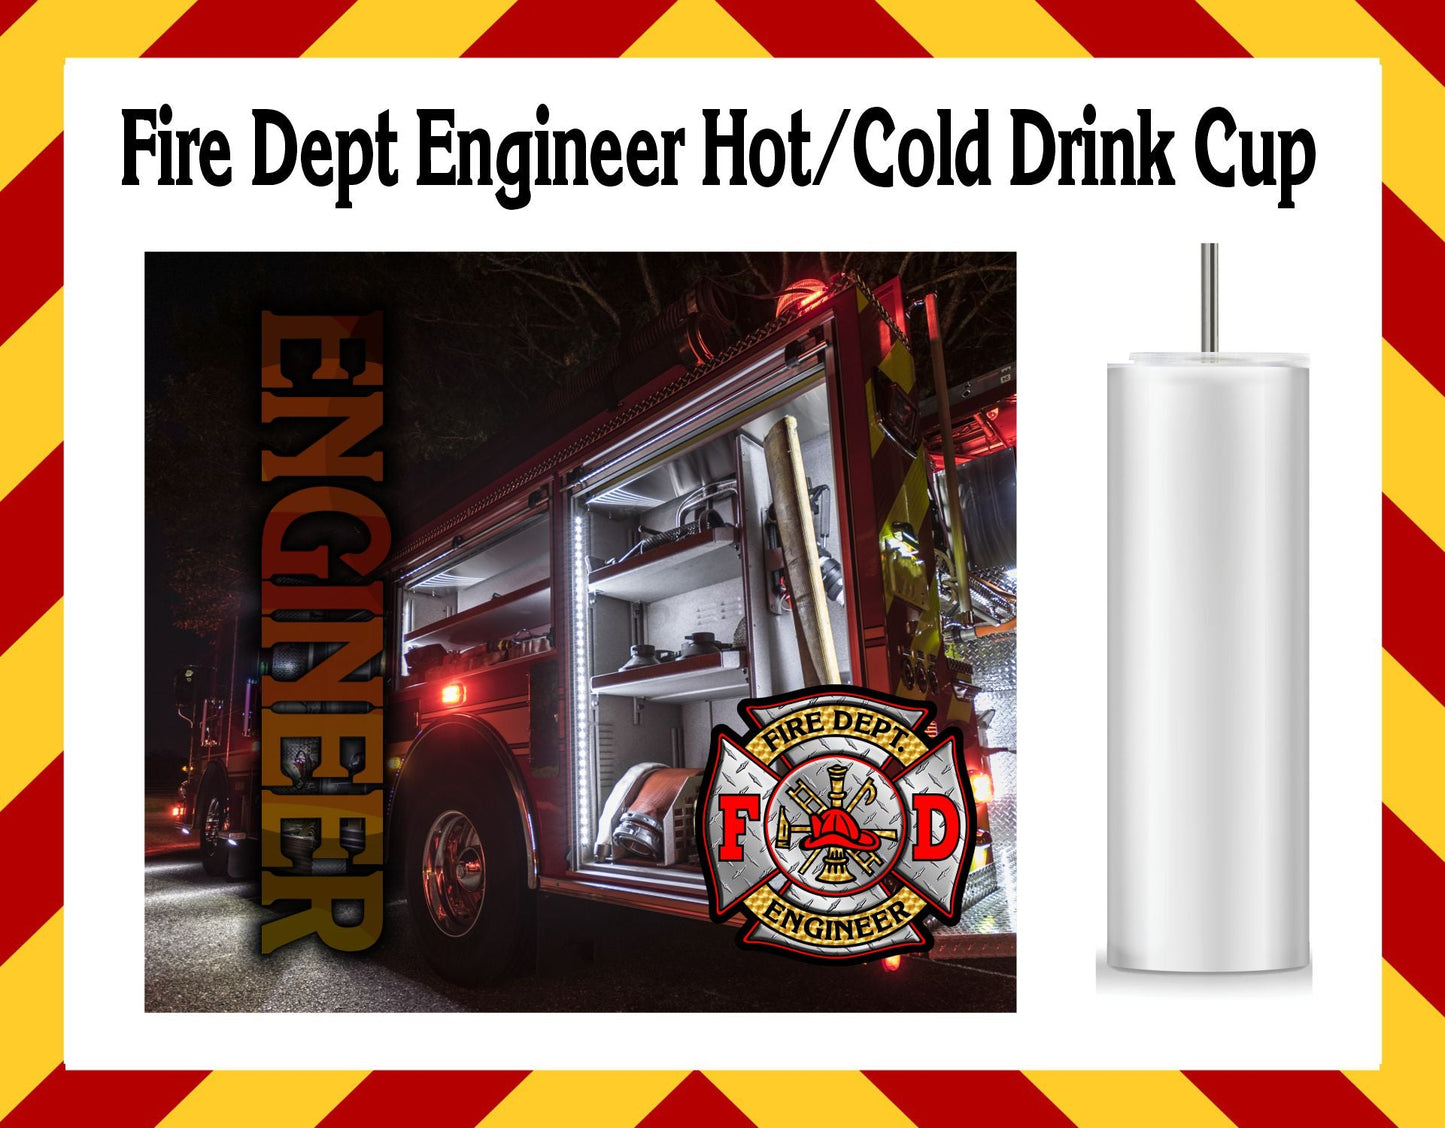 Stainless Steel Cup - Fire Dept. Engineer Design Hot/Cold Cup